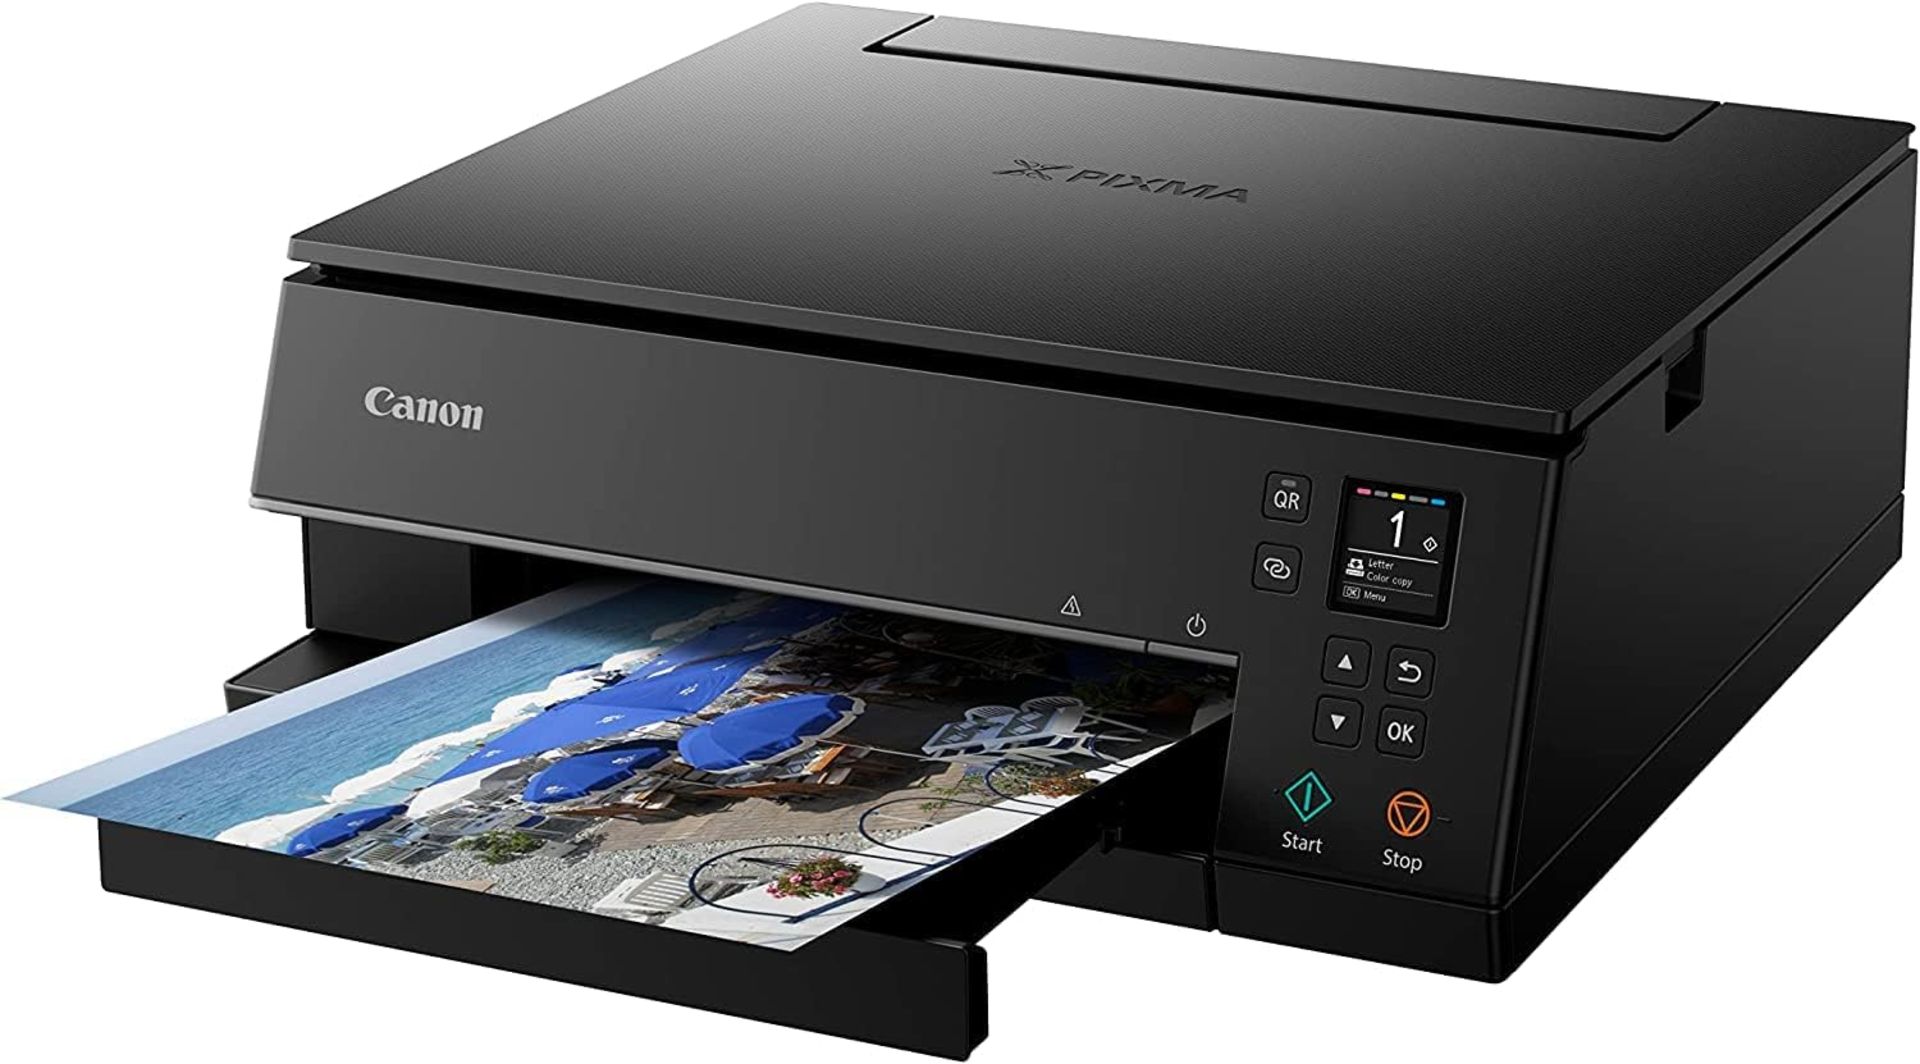 CANON Pixma TS6350a Wireless Colour All In One Inkjet Printer. RRP £129.99. (R6R). MODERN - Smart - Image 3 of 5